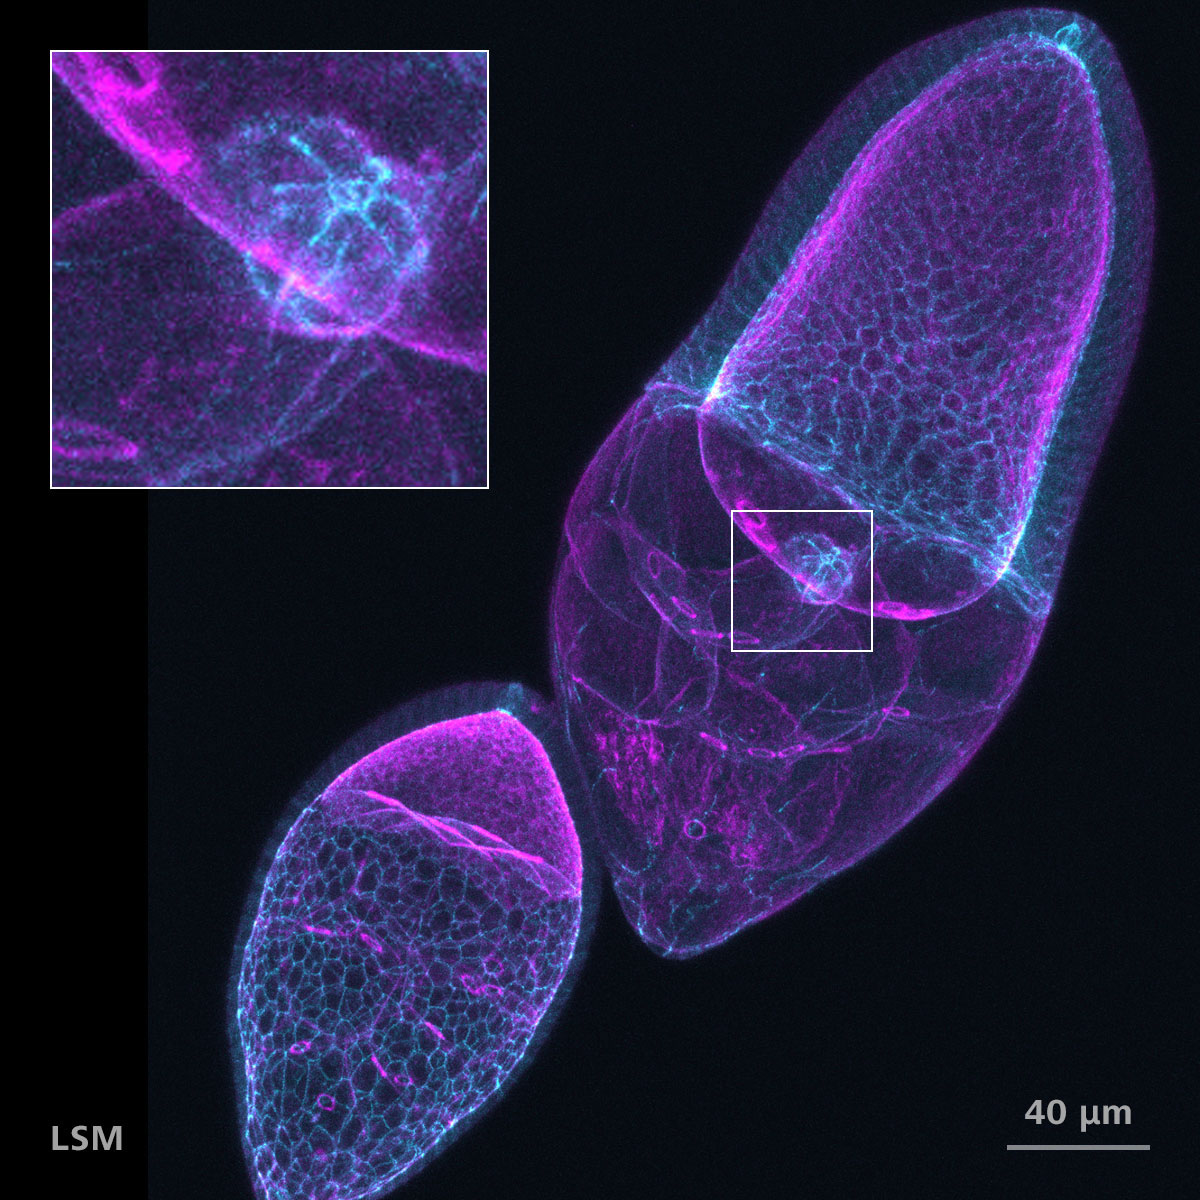 Drosophila egg chambers stained for F-actin (Phalloidin, magenta) and DE-Cadherin (cyan). Courtesy of T. Jacobs, AG Luschnig, WWU Münster; with T. Zobel, Münster Imaging Network, Germany